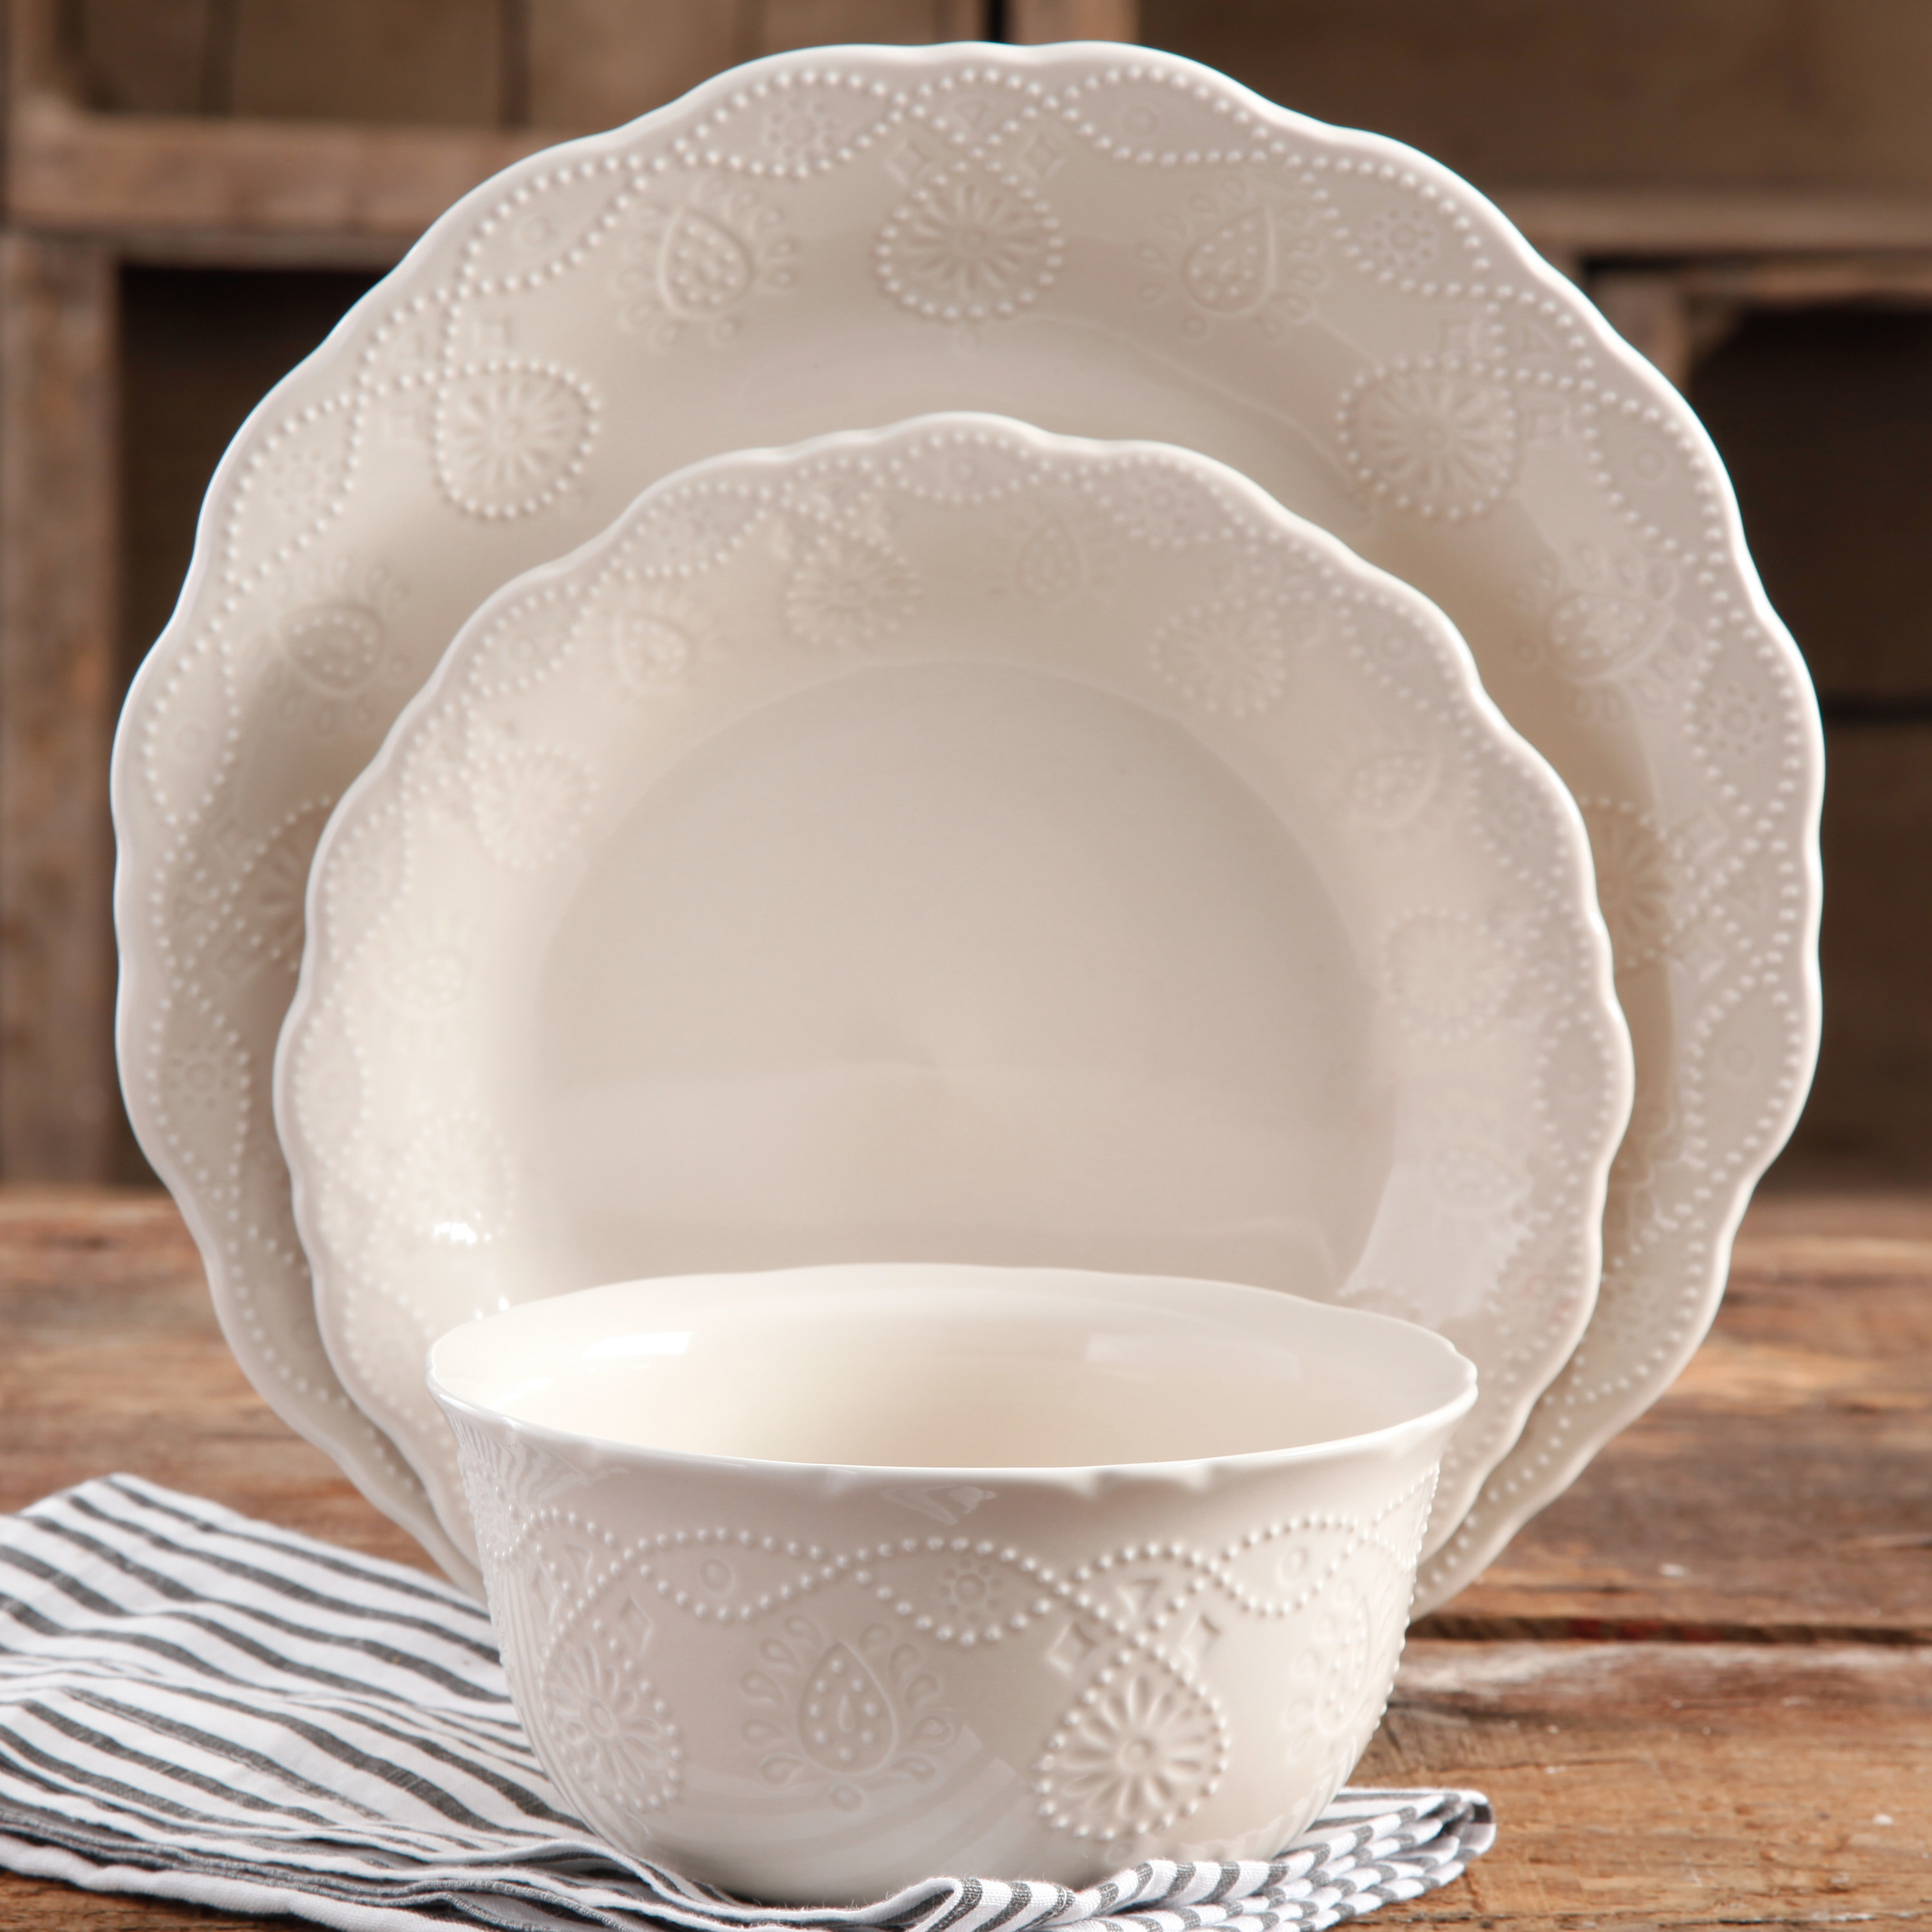 A set of white tableware